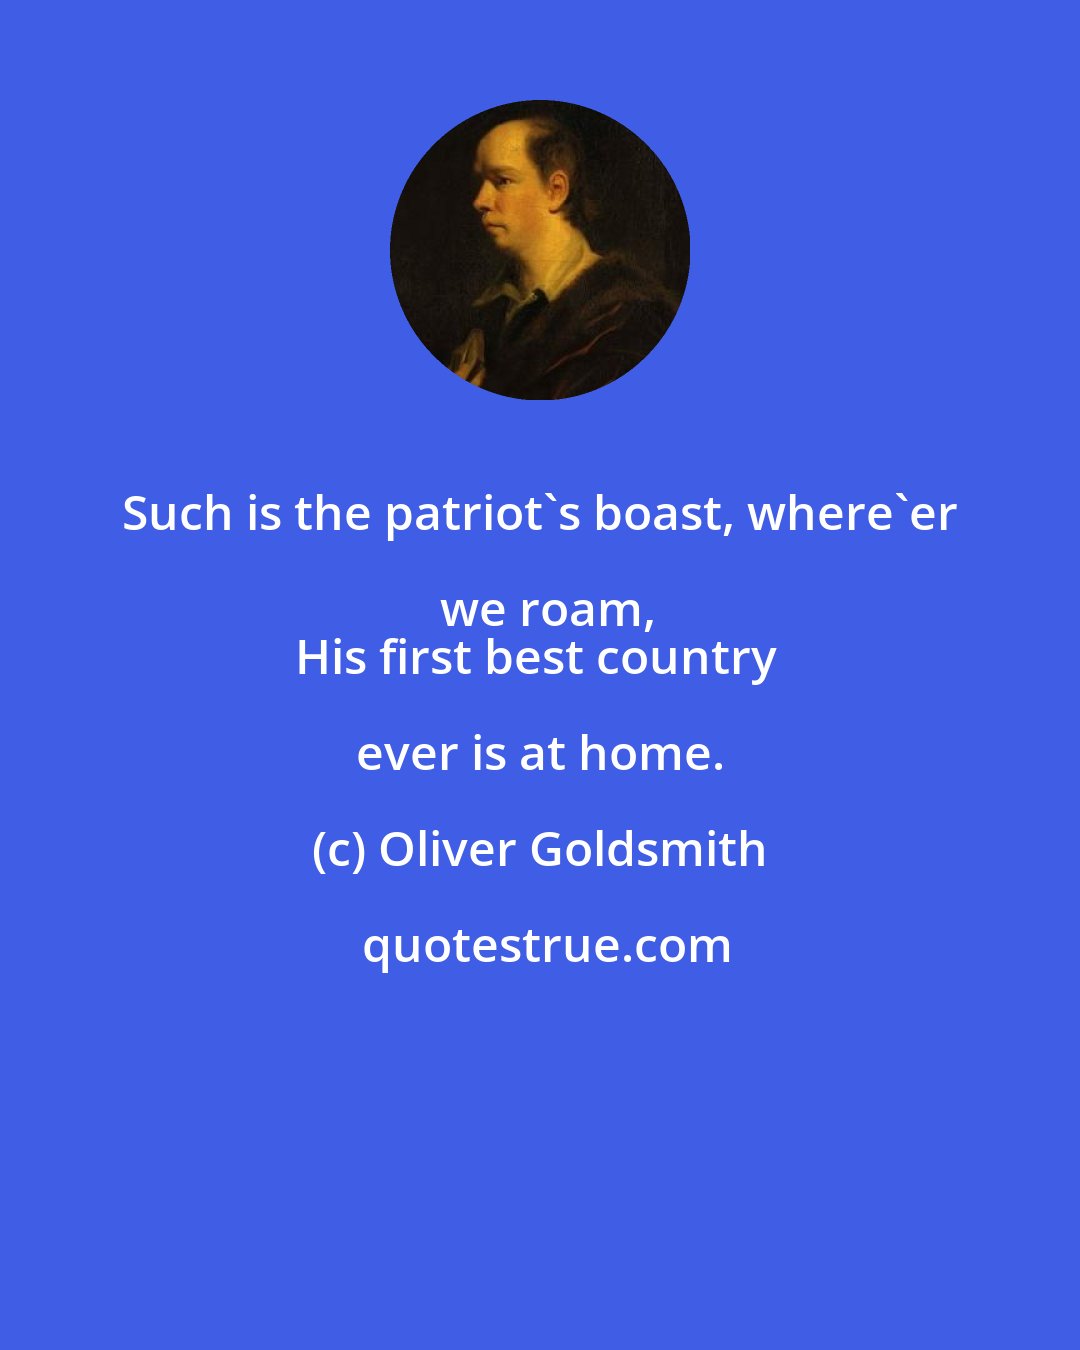 Oliver Goldsmith: Such is the patriot's boast, where'er we roam,
His first best country ever is at home.